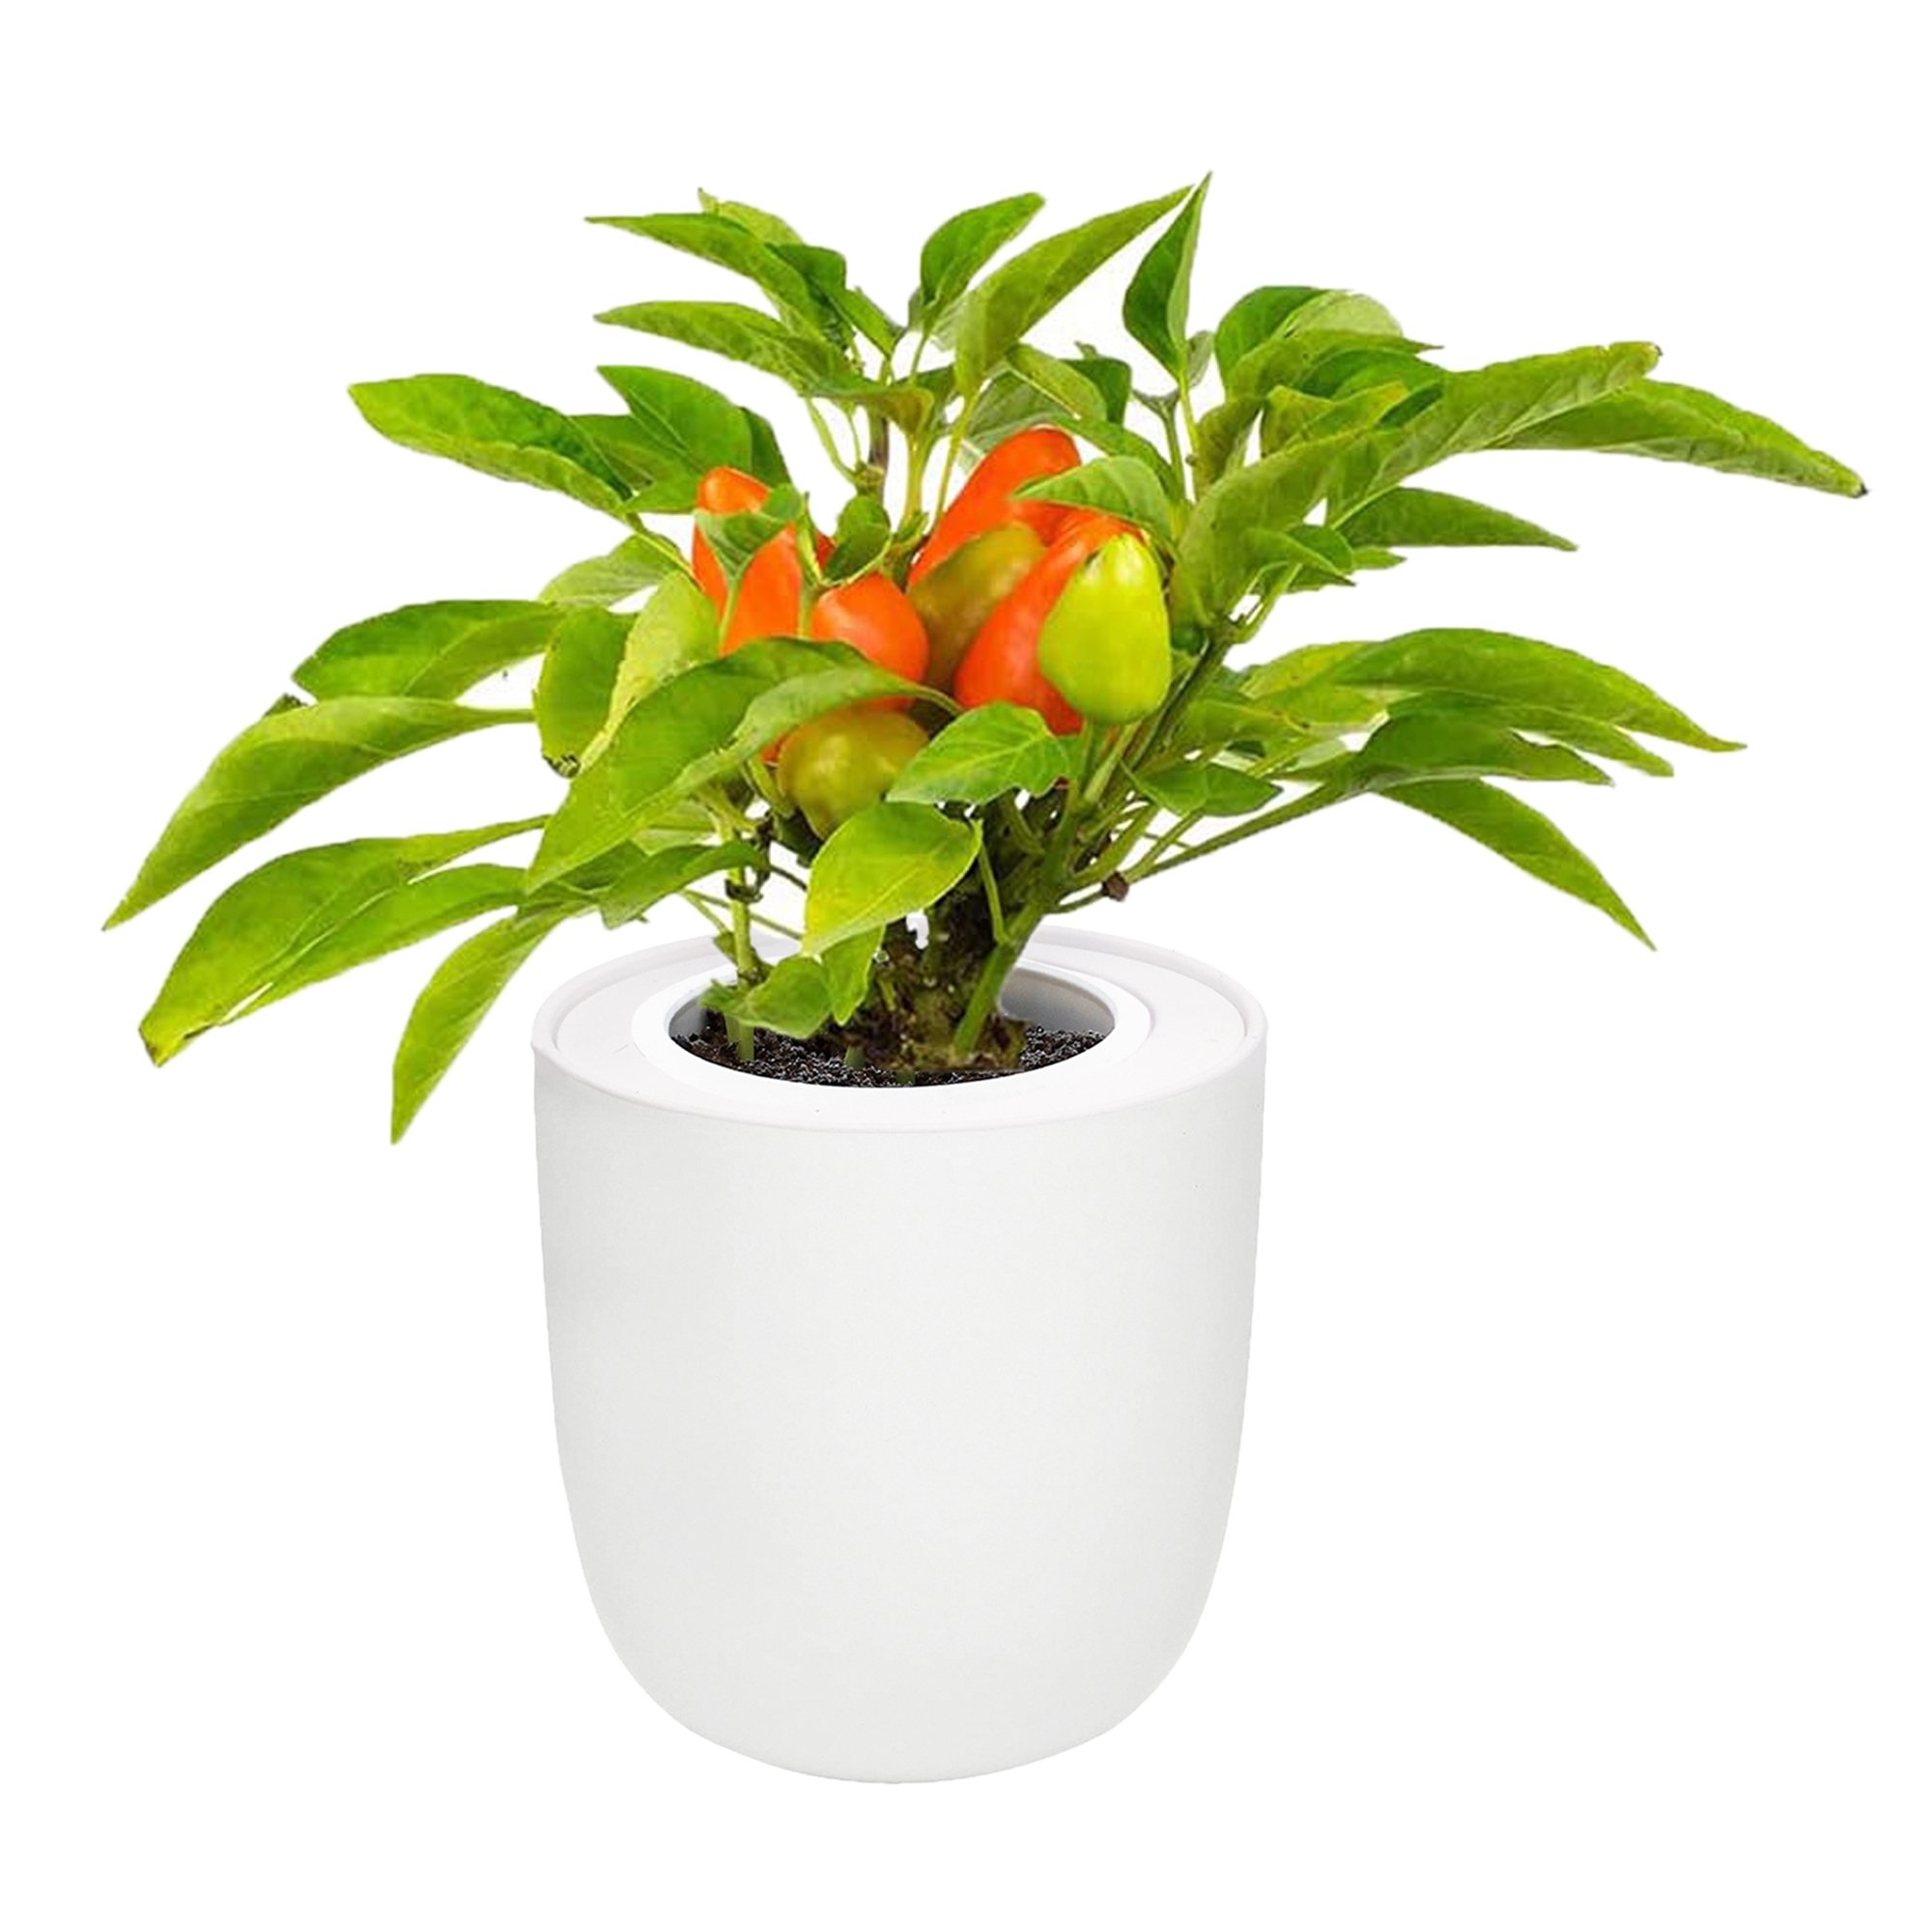 Pepper - Jalapeño Early White Ceramic Pot Hydroponic Growing Kit with Seeds